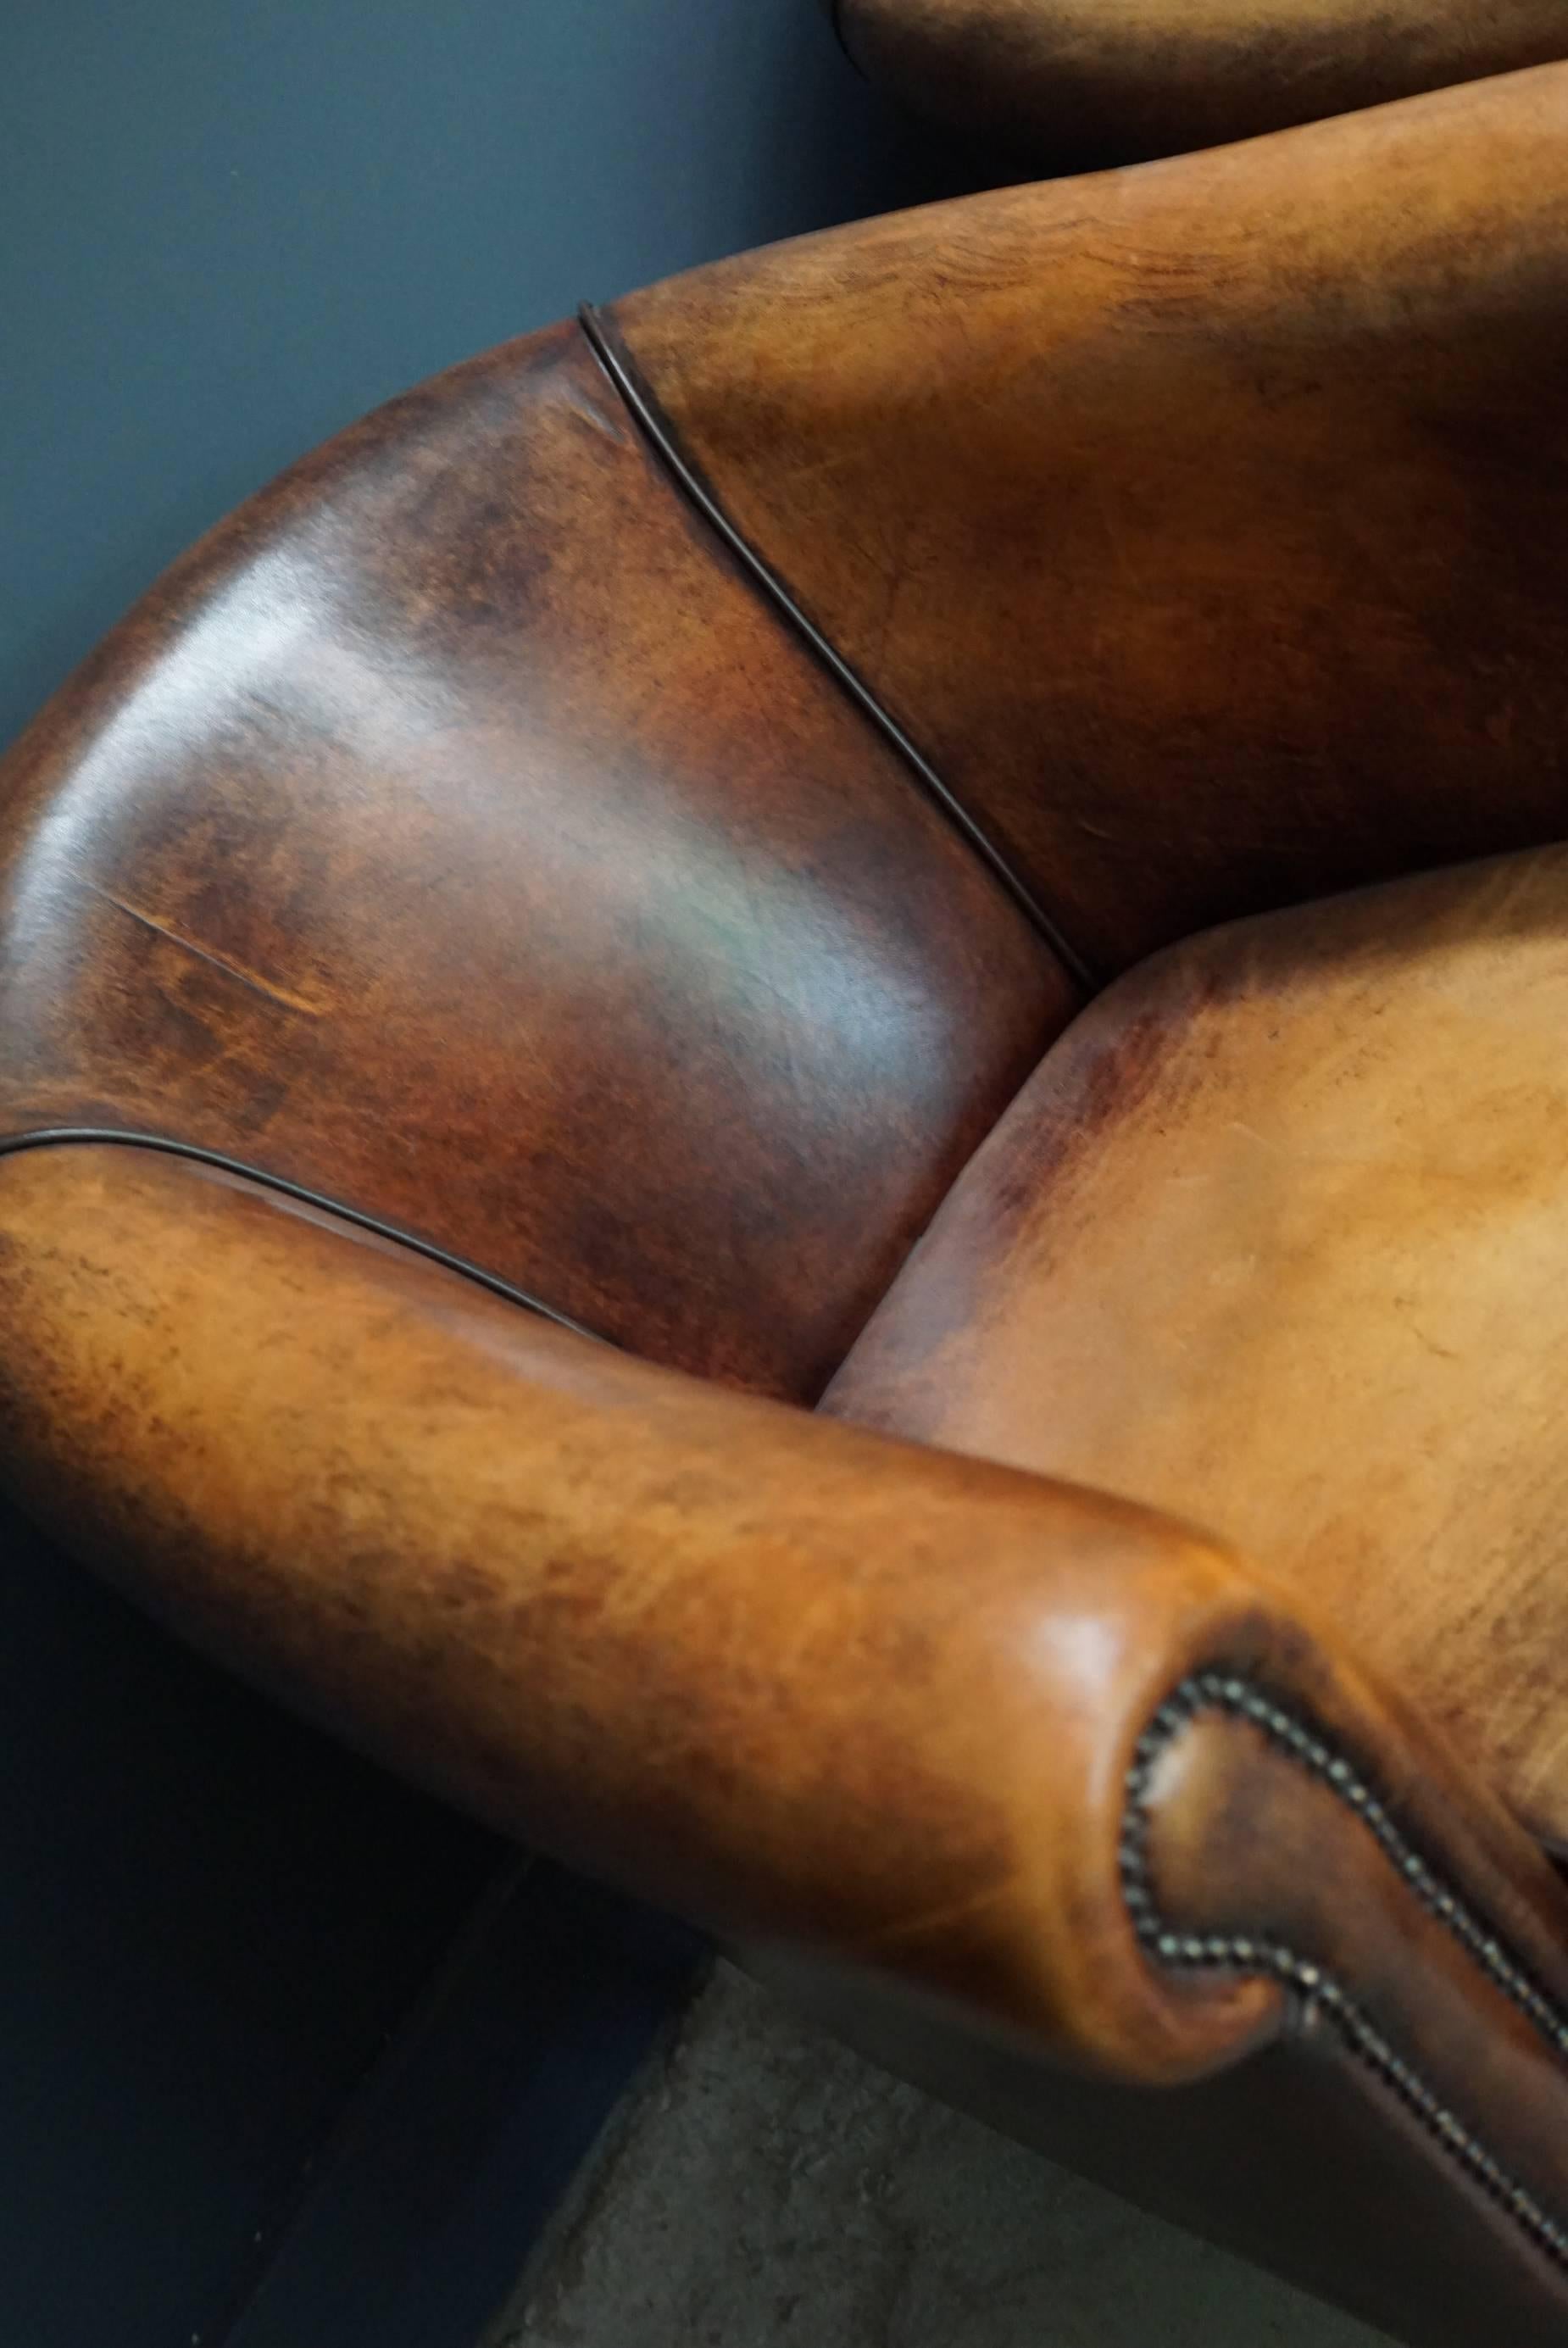 Vintage Dutch Cognac Leather Club Chairs, Set of Two In Good Condition In Nijmegen, NL